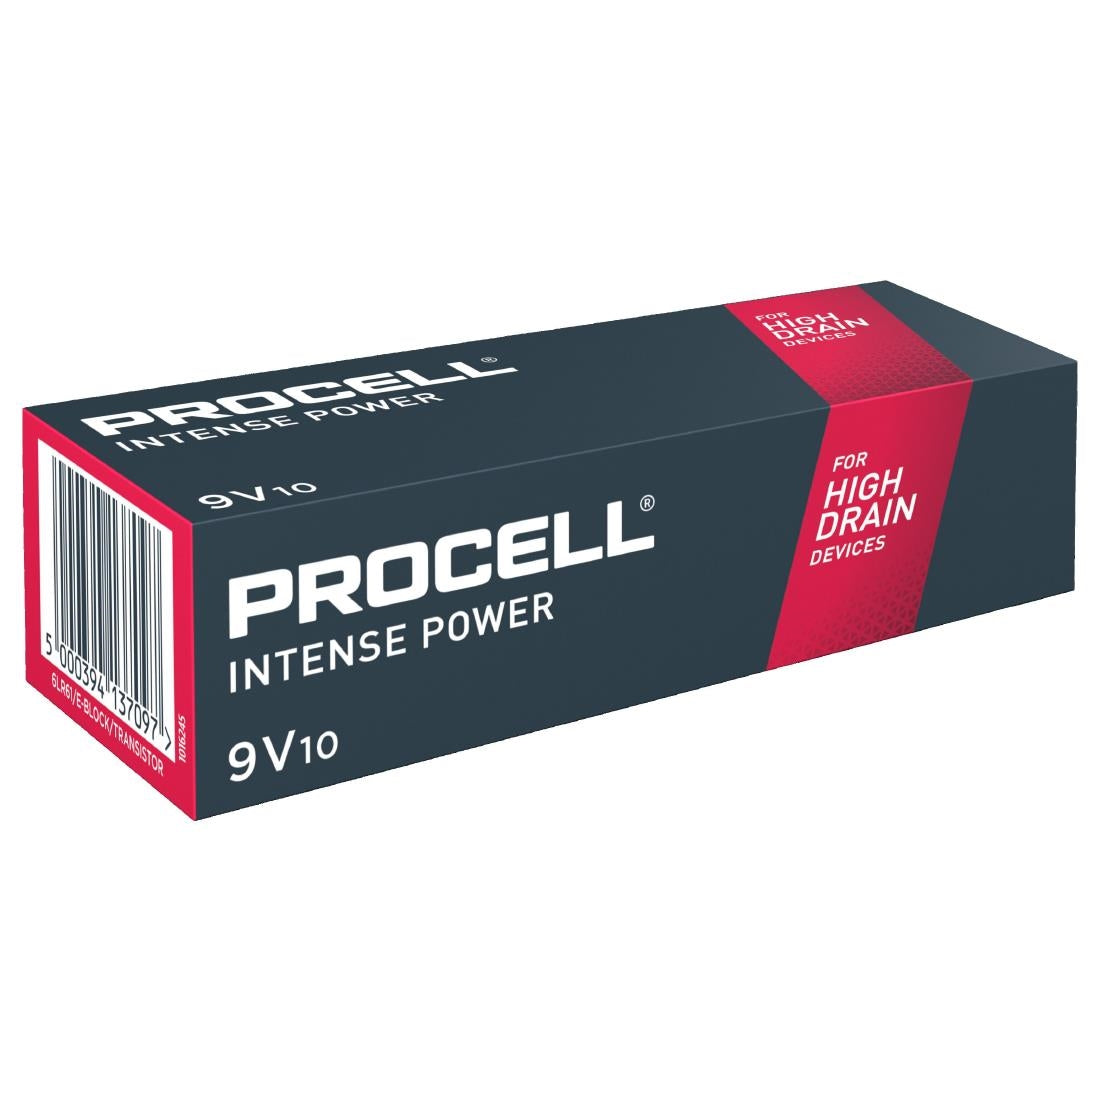 FS725 Duracell Procell Intense 9V Battery (Pack of 10) JD Catering Equipment Solutions Ltd